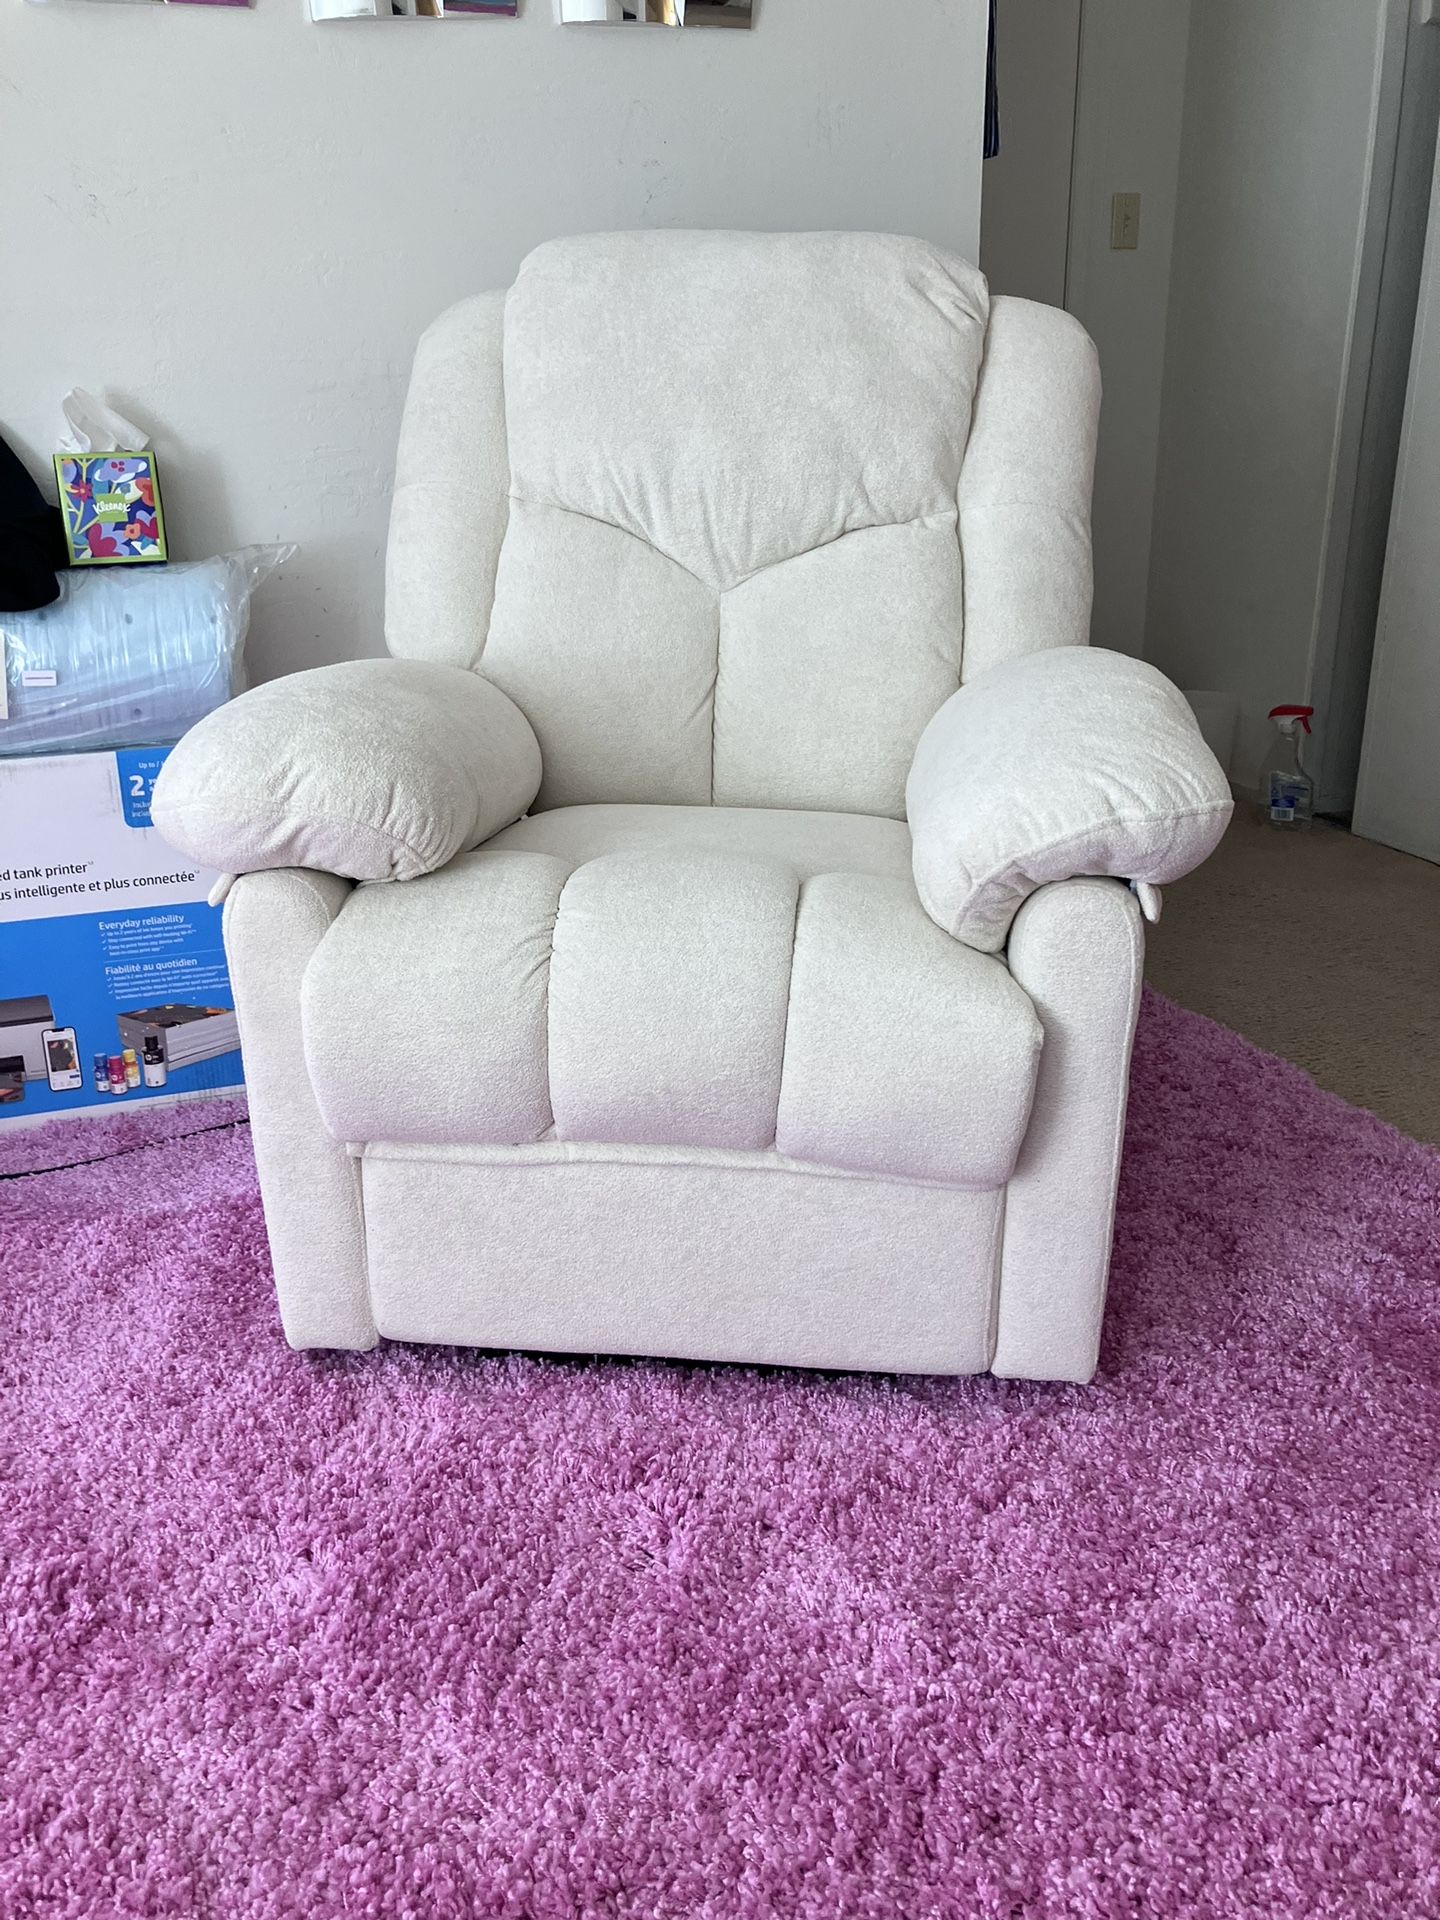 Brand New Electric Recliner 